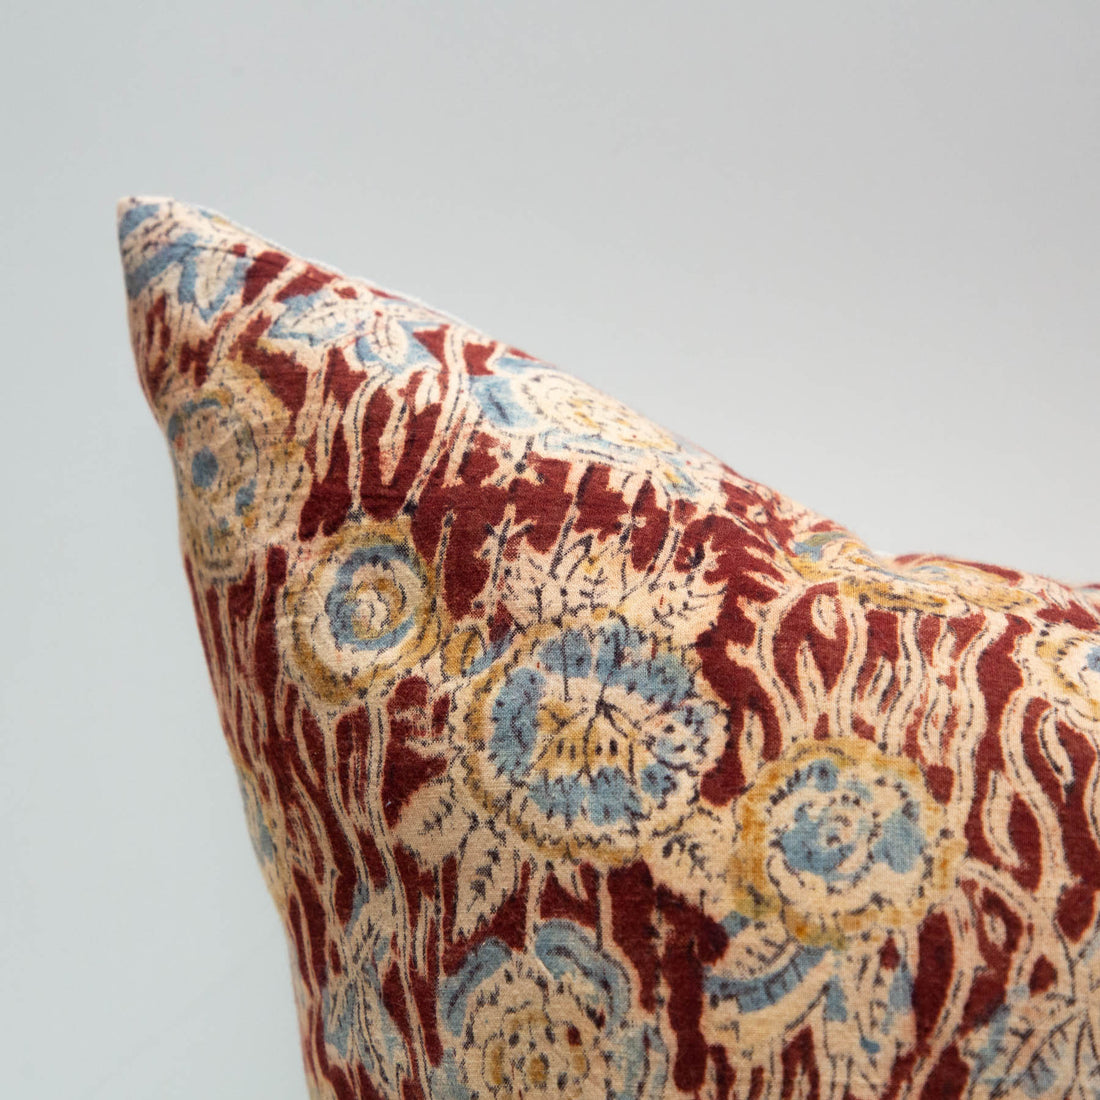 Vintage Block Print Pillow - Maroon with blue flowers